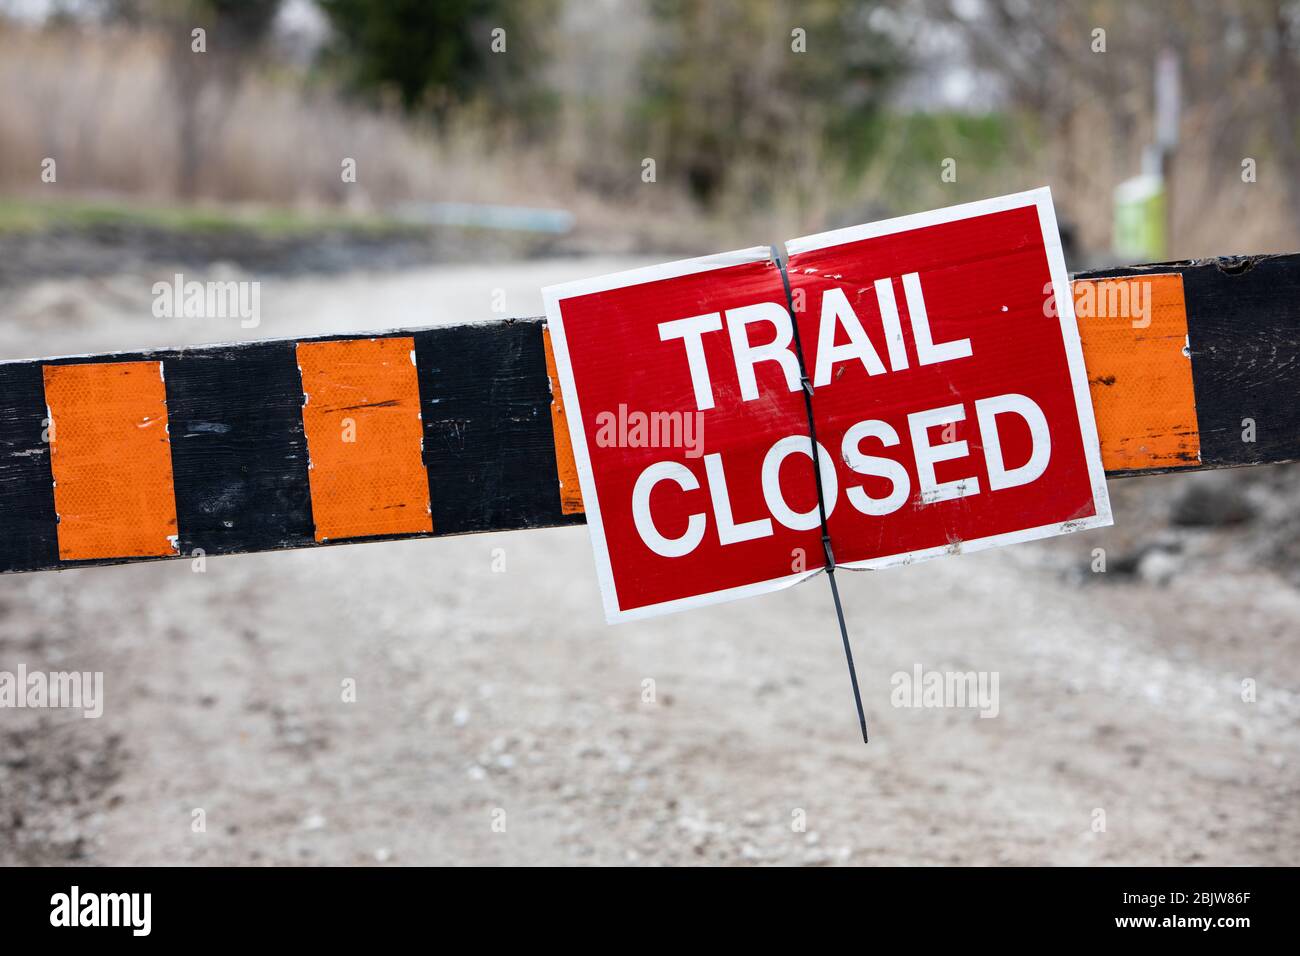 Trail Closed Warning Sign Keep Out of Park Stock Photo